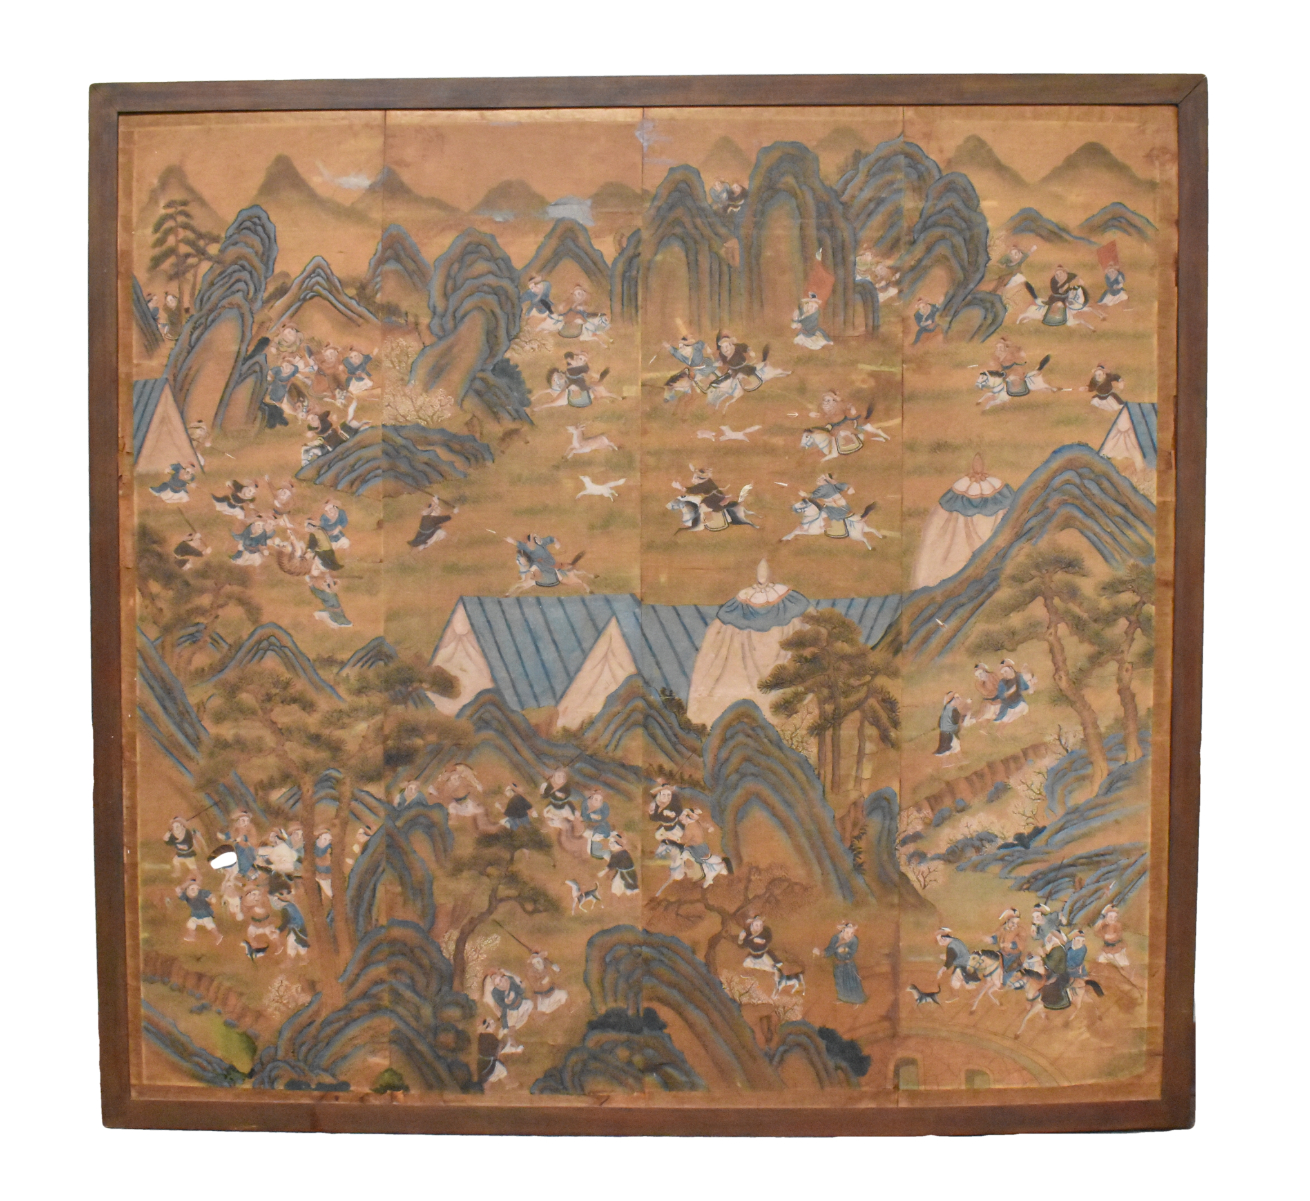 LARGE CHINESE PAINTING OF HUNTING 33a6bd